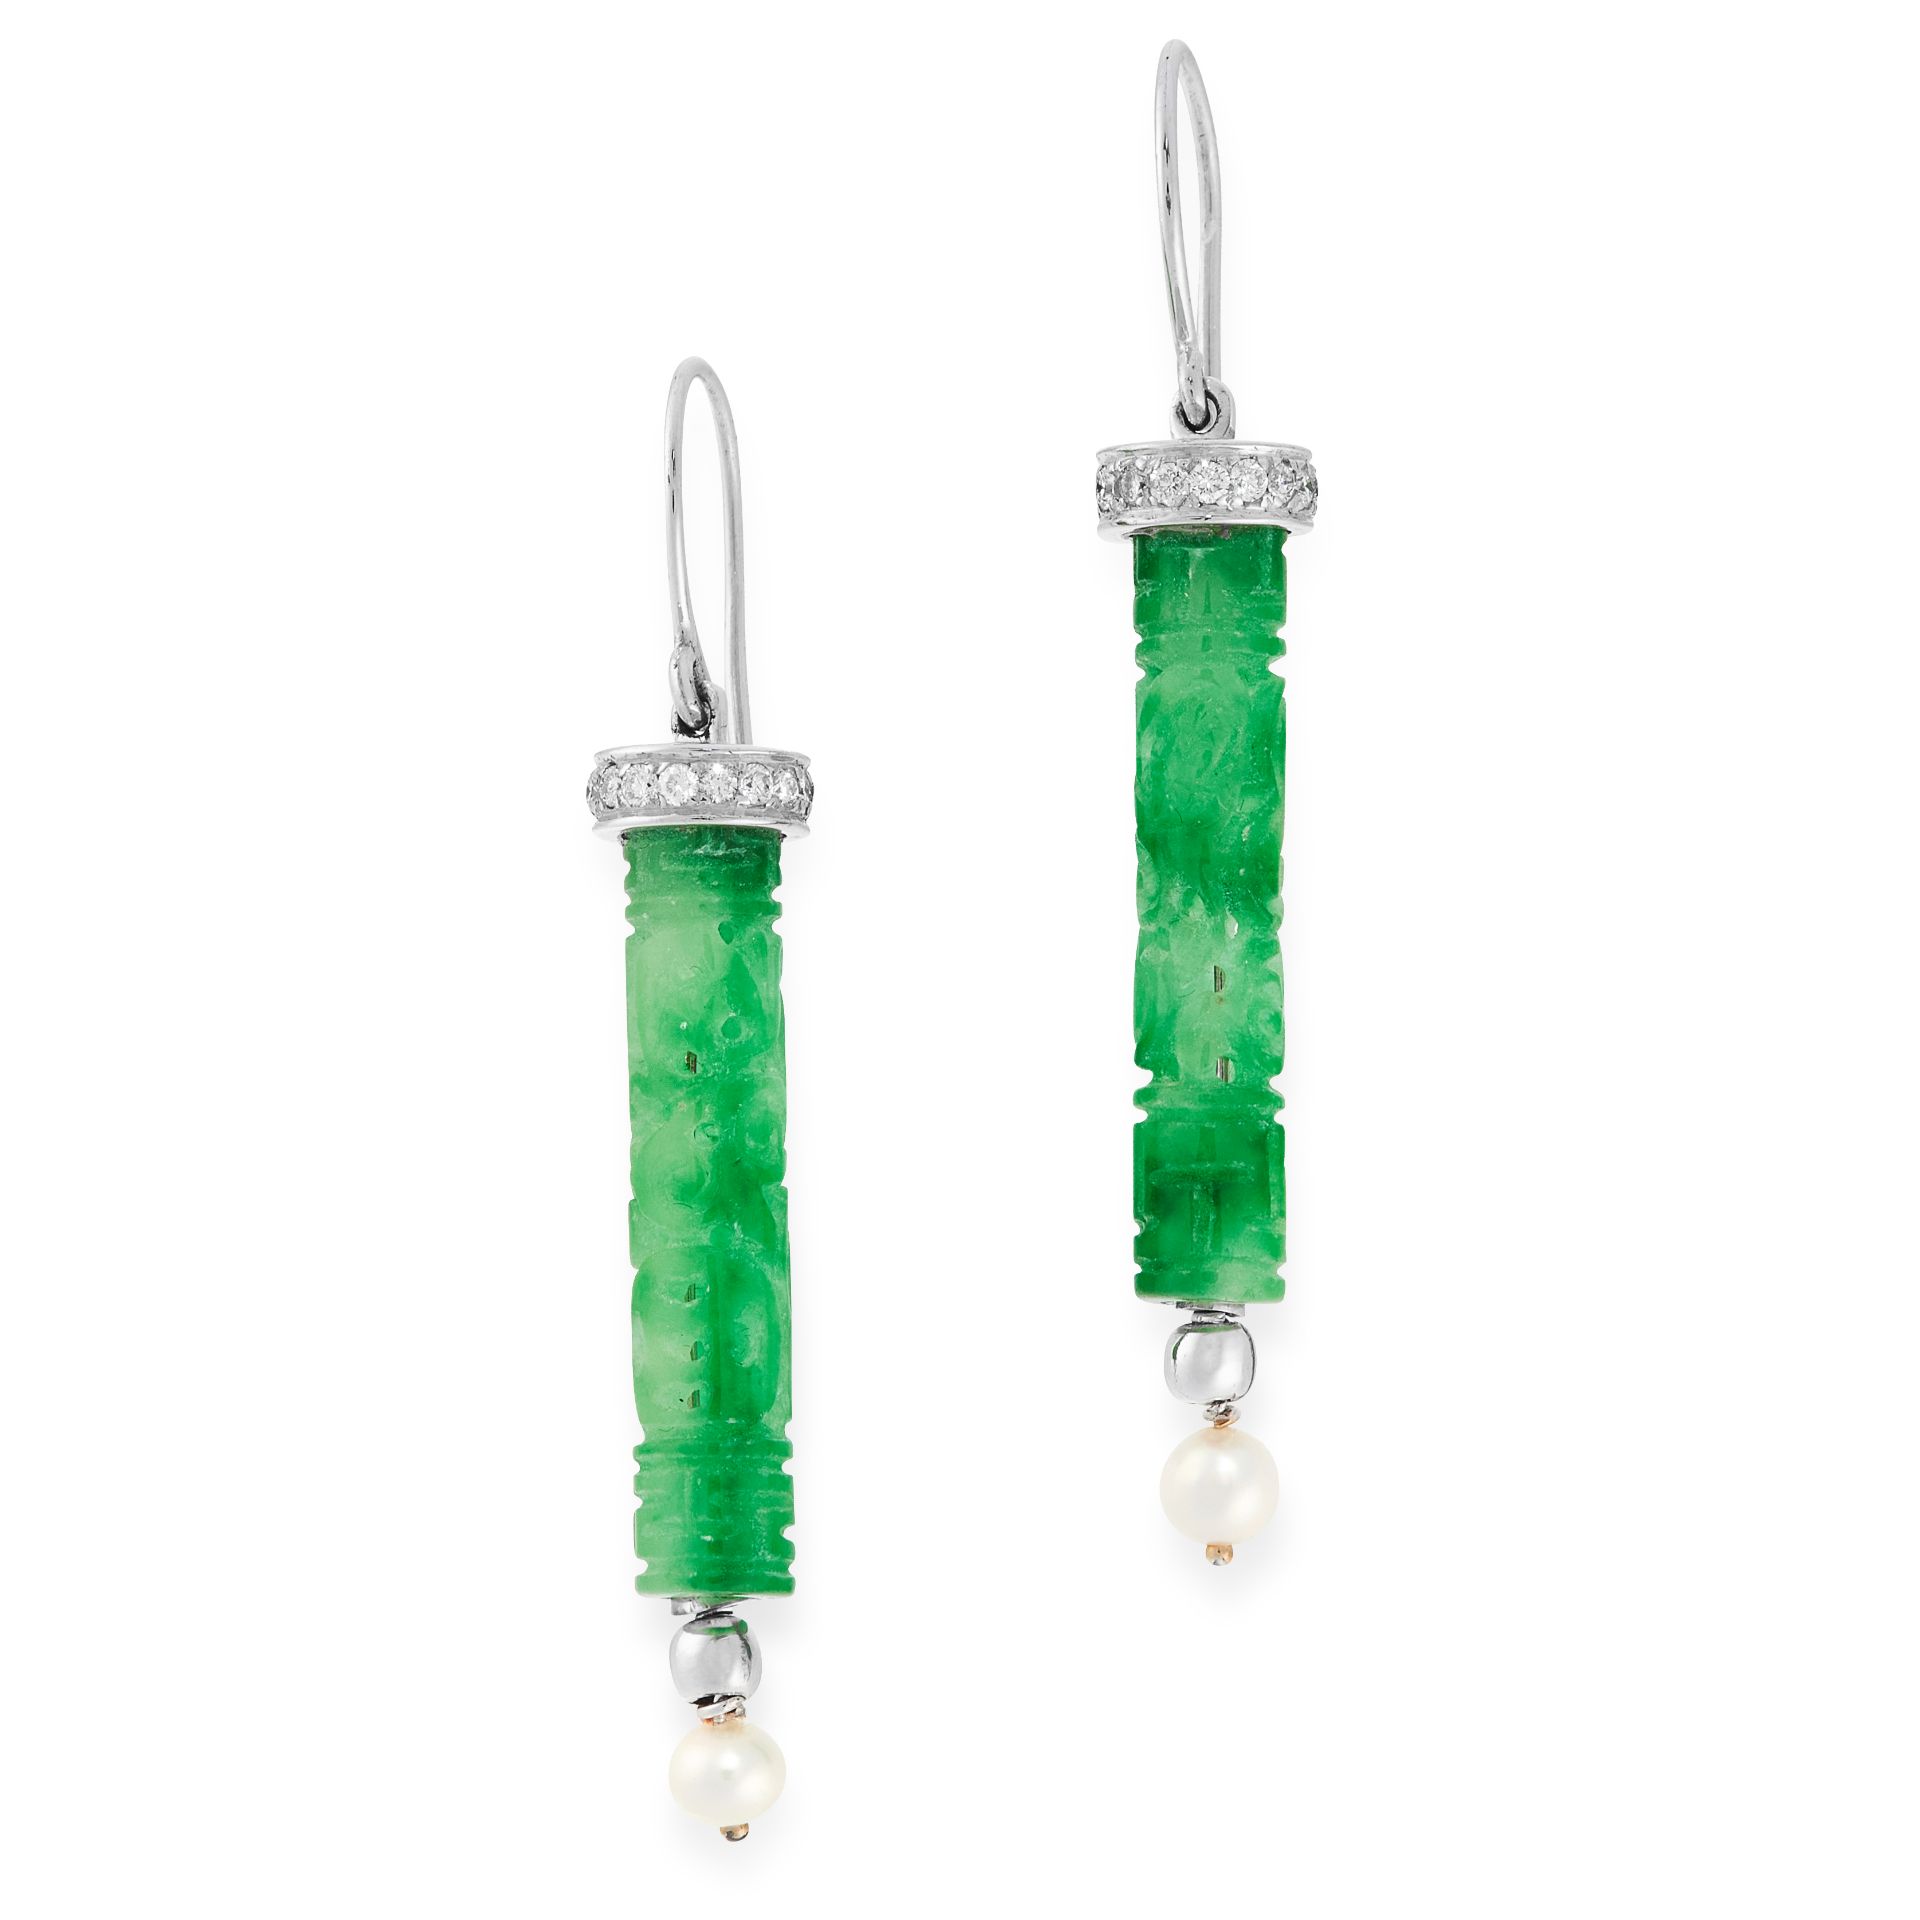 A PAIR OF JADEITE JADE, DIAMOND AND PEARL DROP EARRINGS in 18ct white gold, comprising of a carved